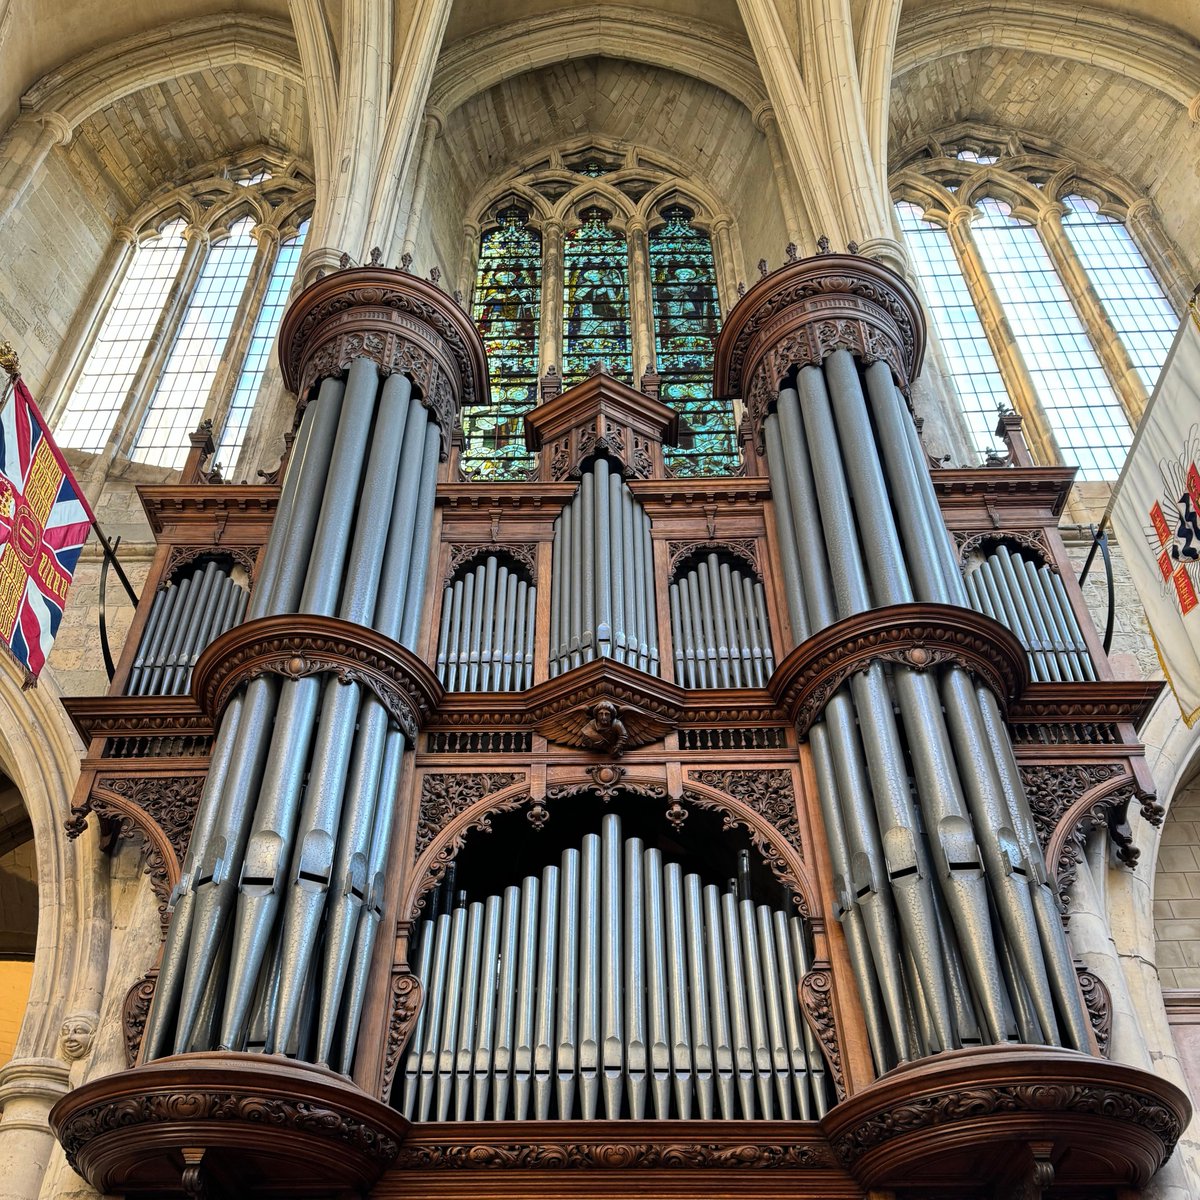 Our Assistant Organist James Gough will be launching a 2 cd set of Bach’s trio sonatas next Wednesday (22nd May) at St Matthew’s Church, Westminster. All are welcome to join for talks, a performance from James and evensong. Please be seated by 6.15pm if you can.